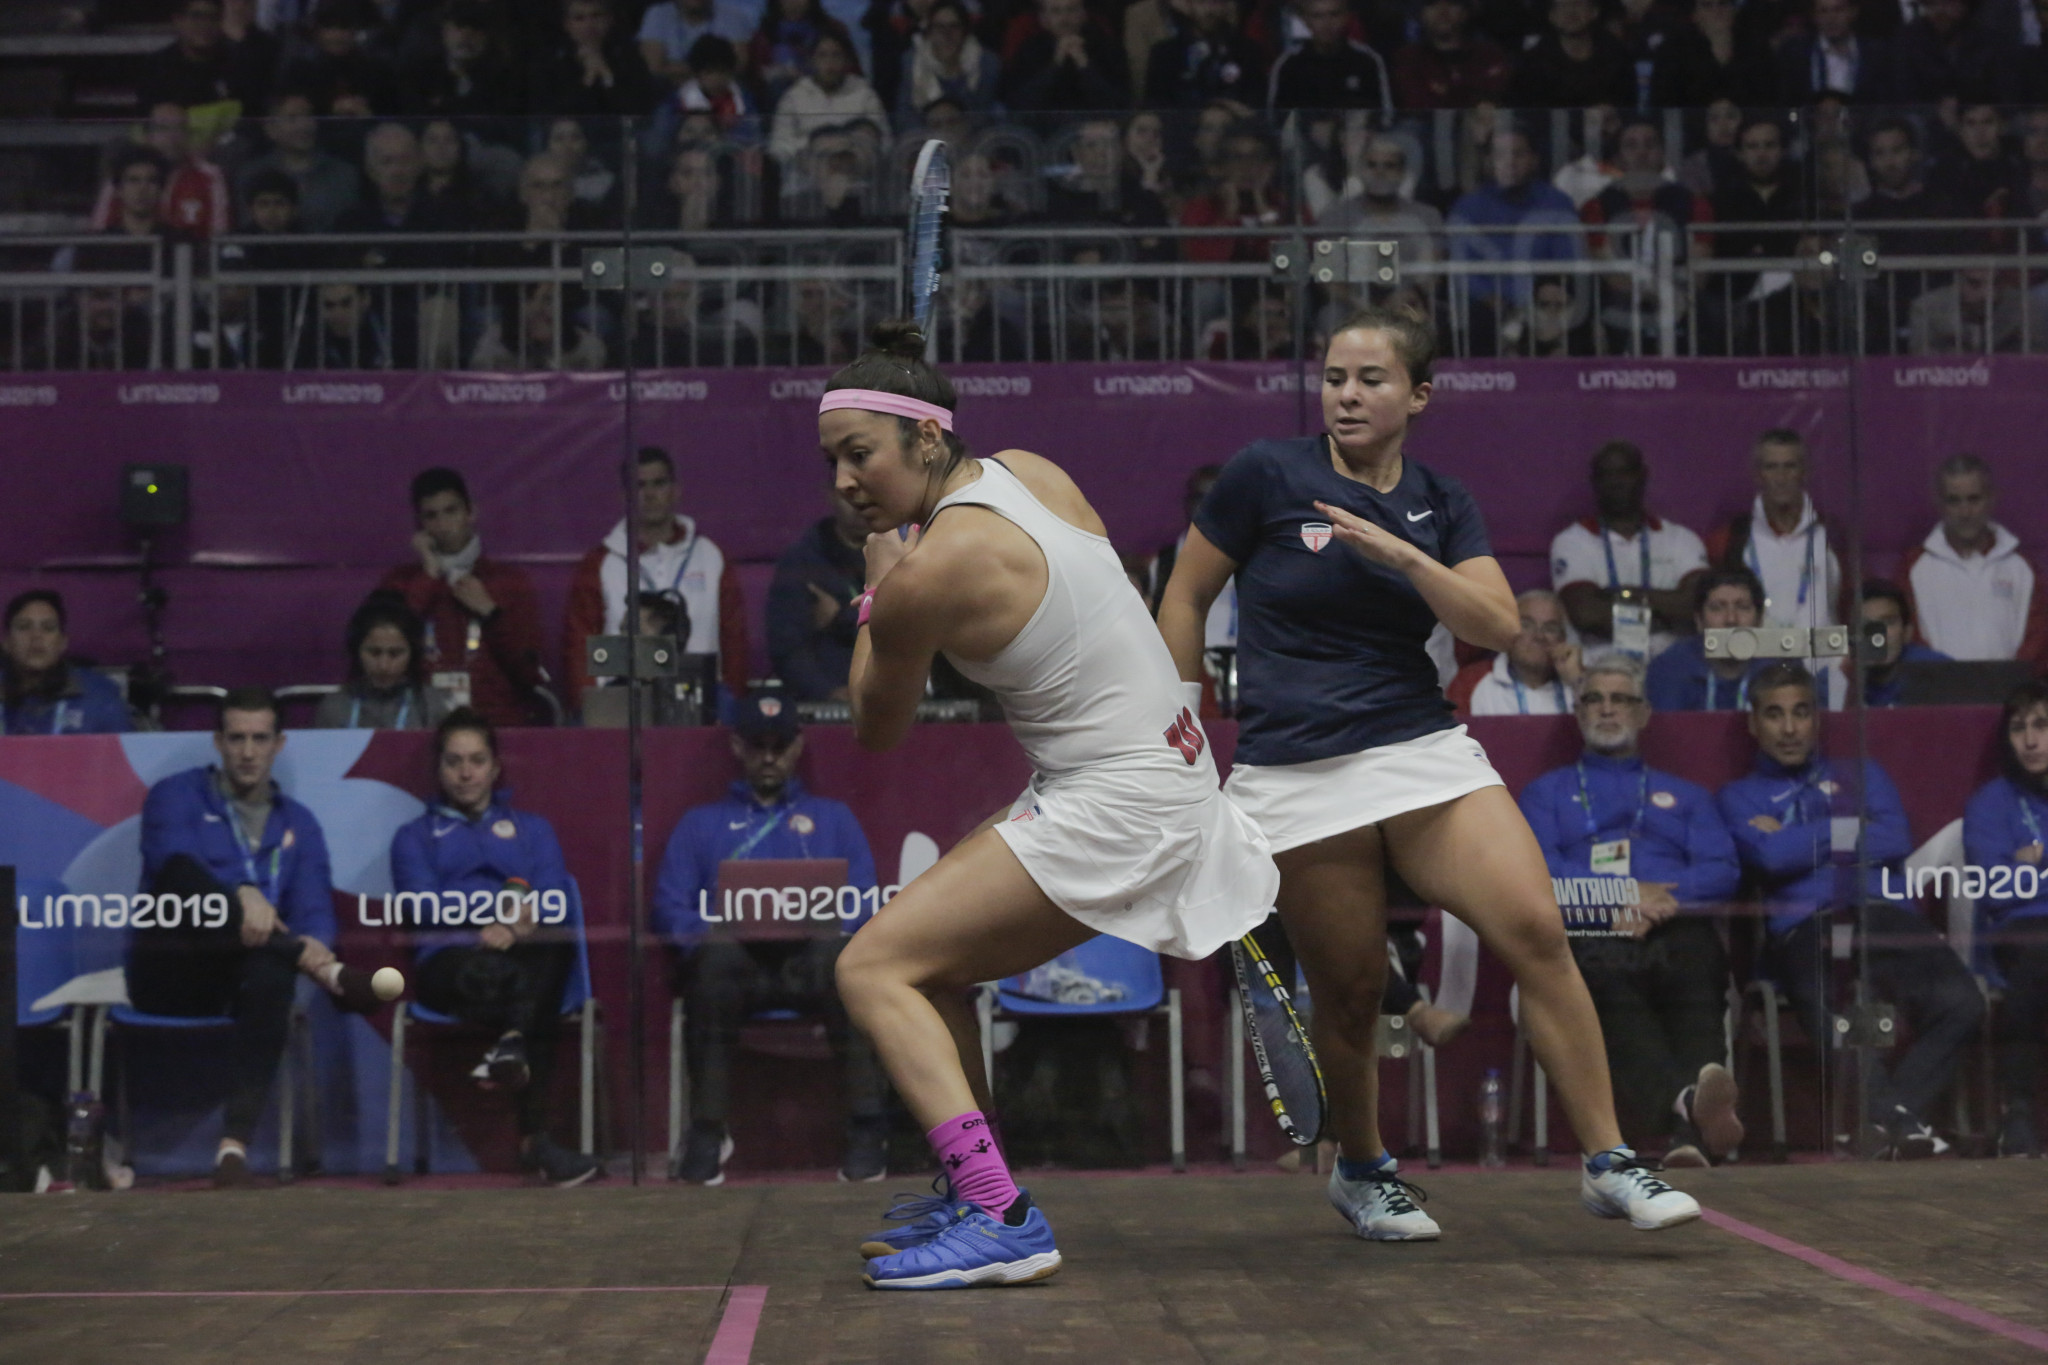 Amanda Sobhy was the victor in an all-American women's squash final ©Lima 2019